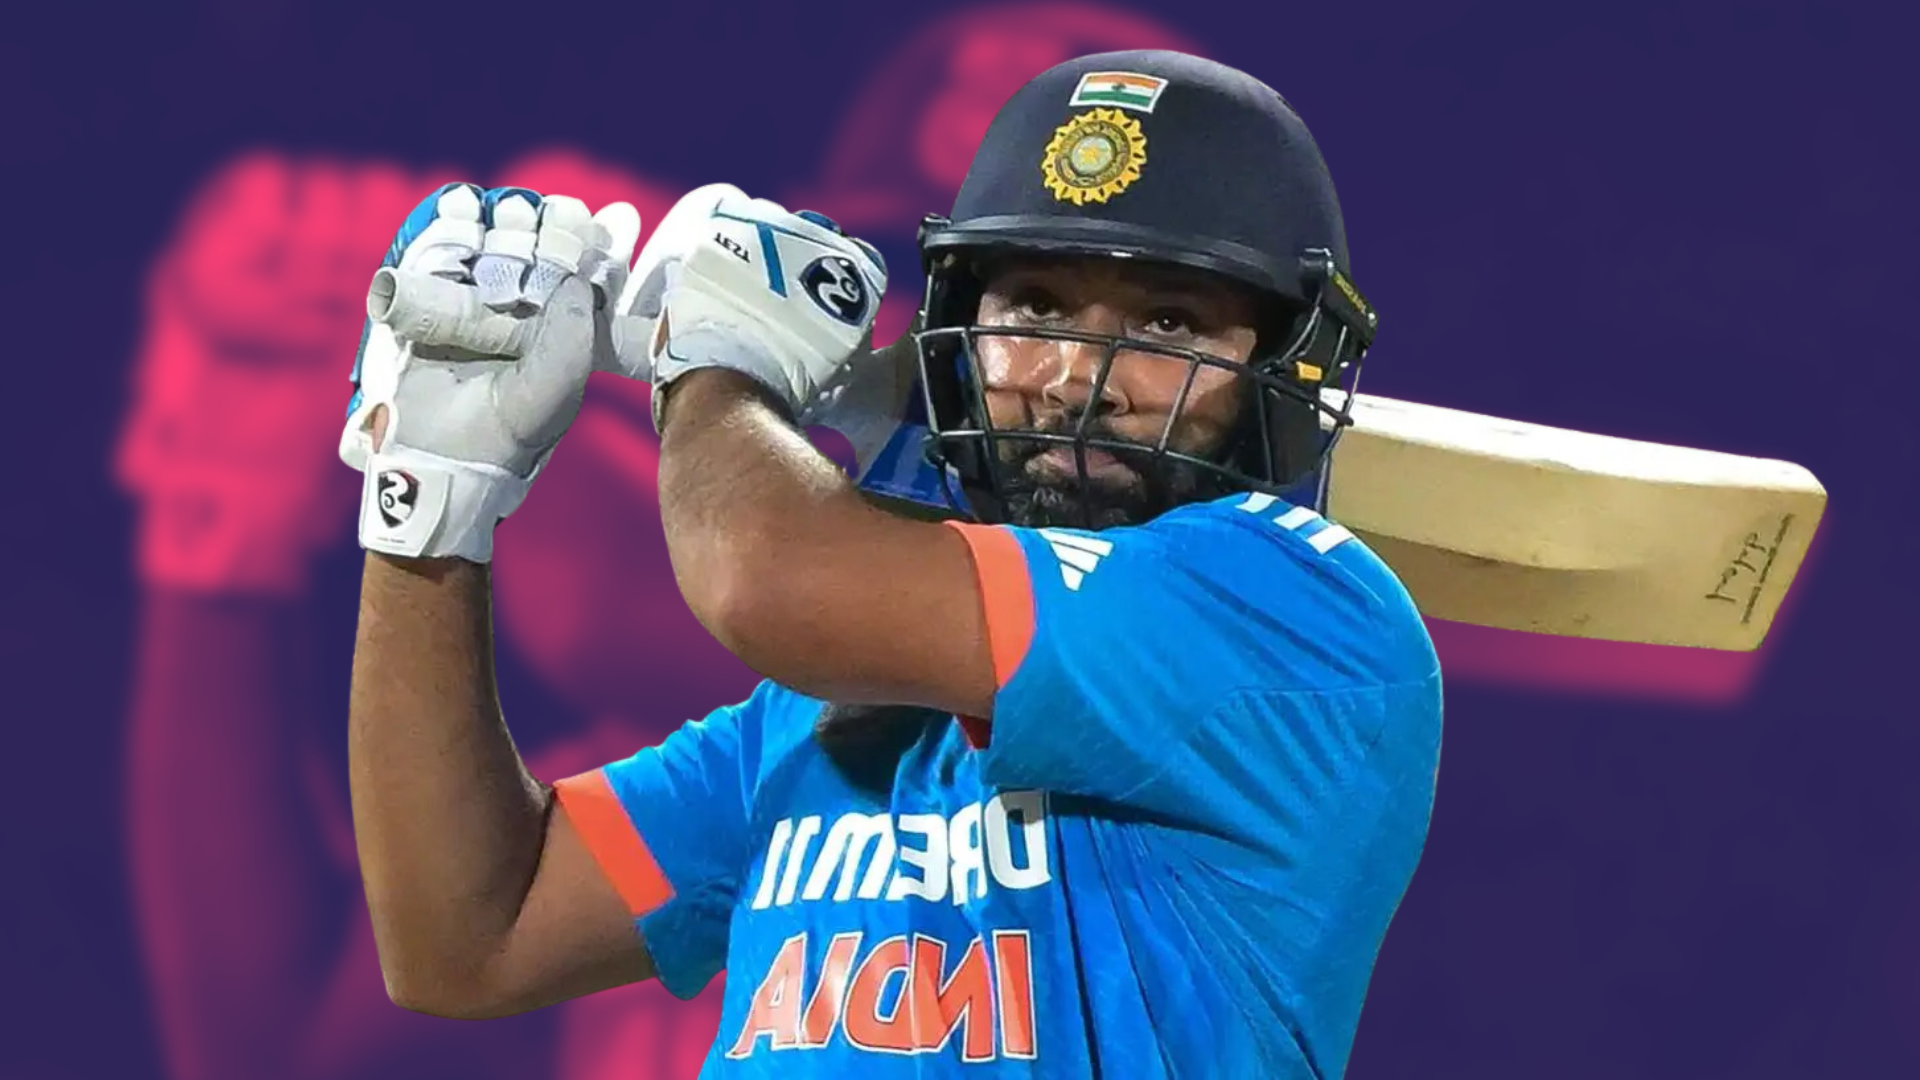 Rohit Sharma: Champion On And Off The Field – A Journey Of Triumph